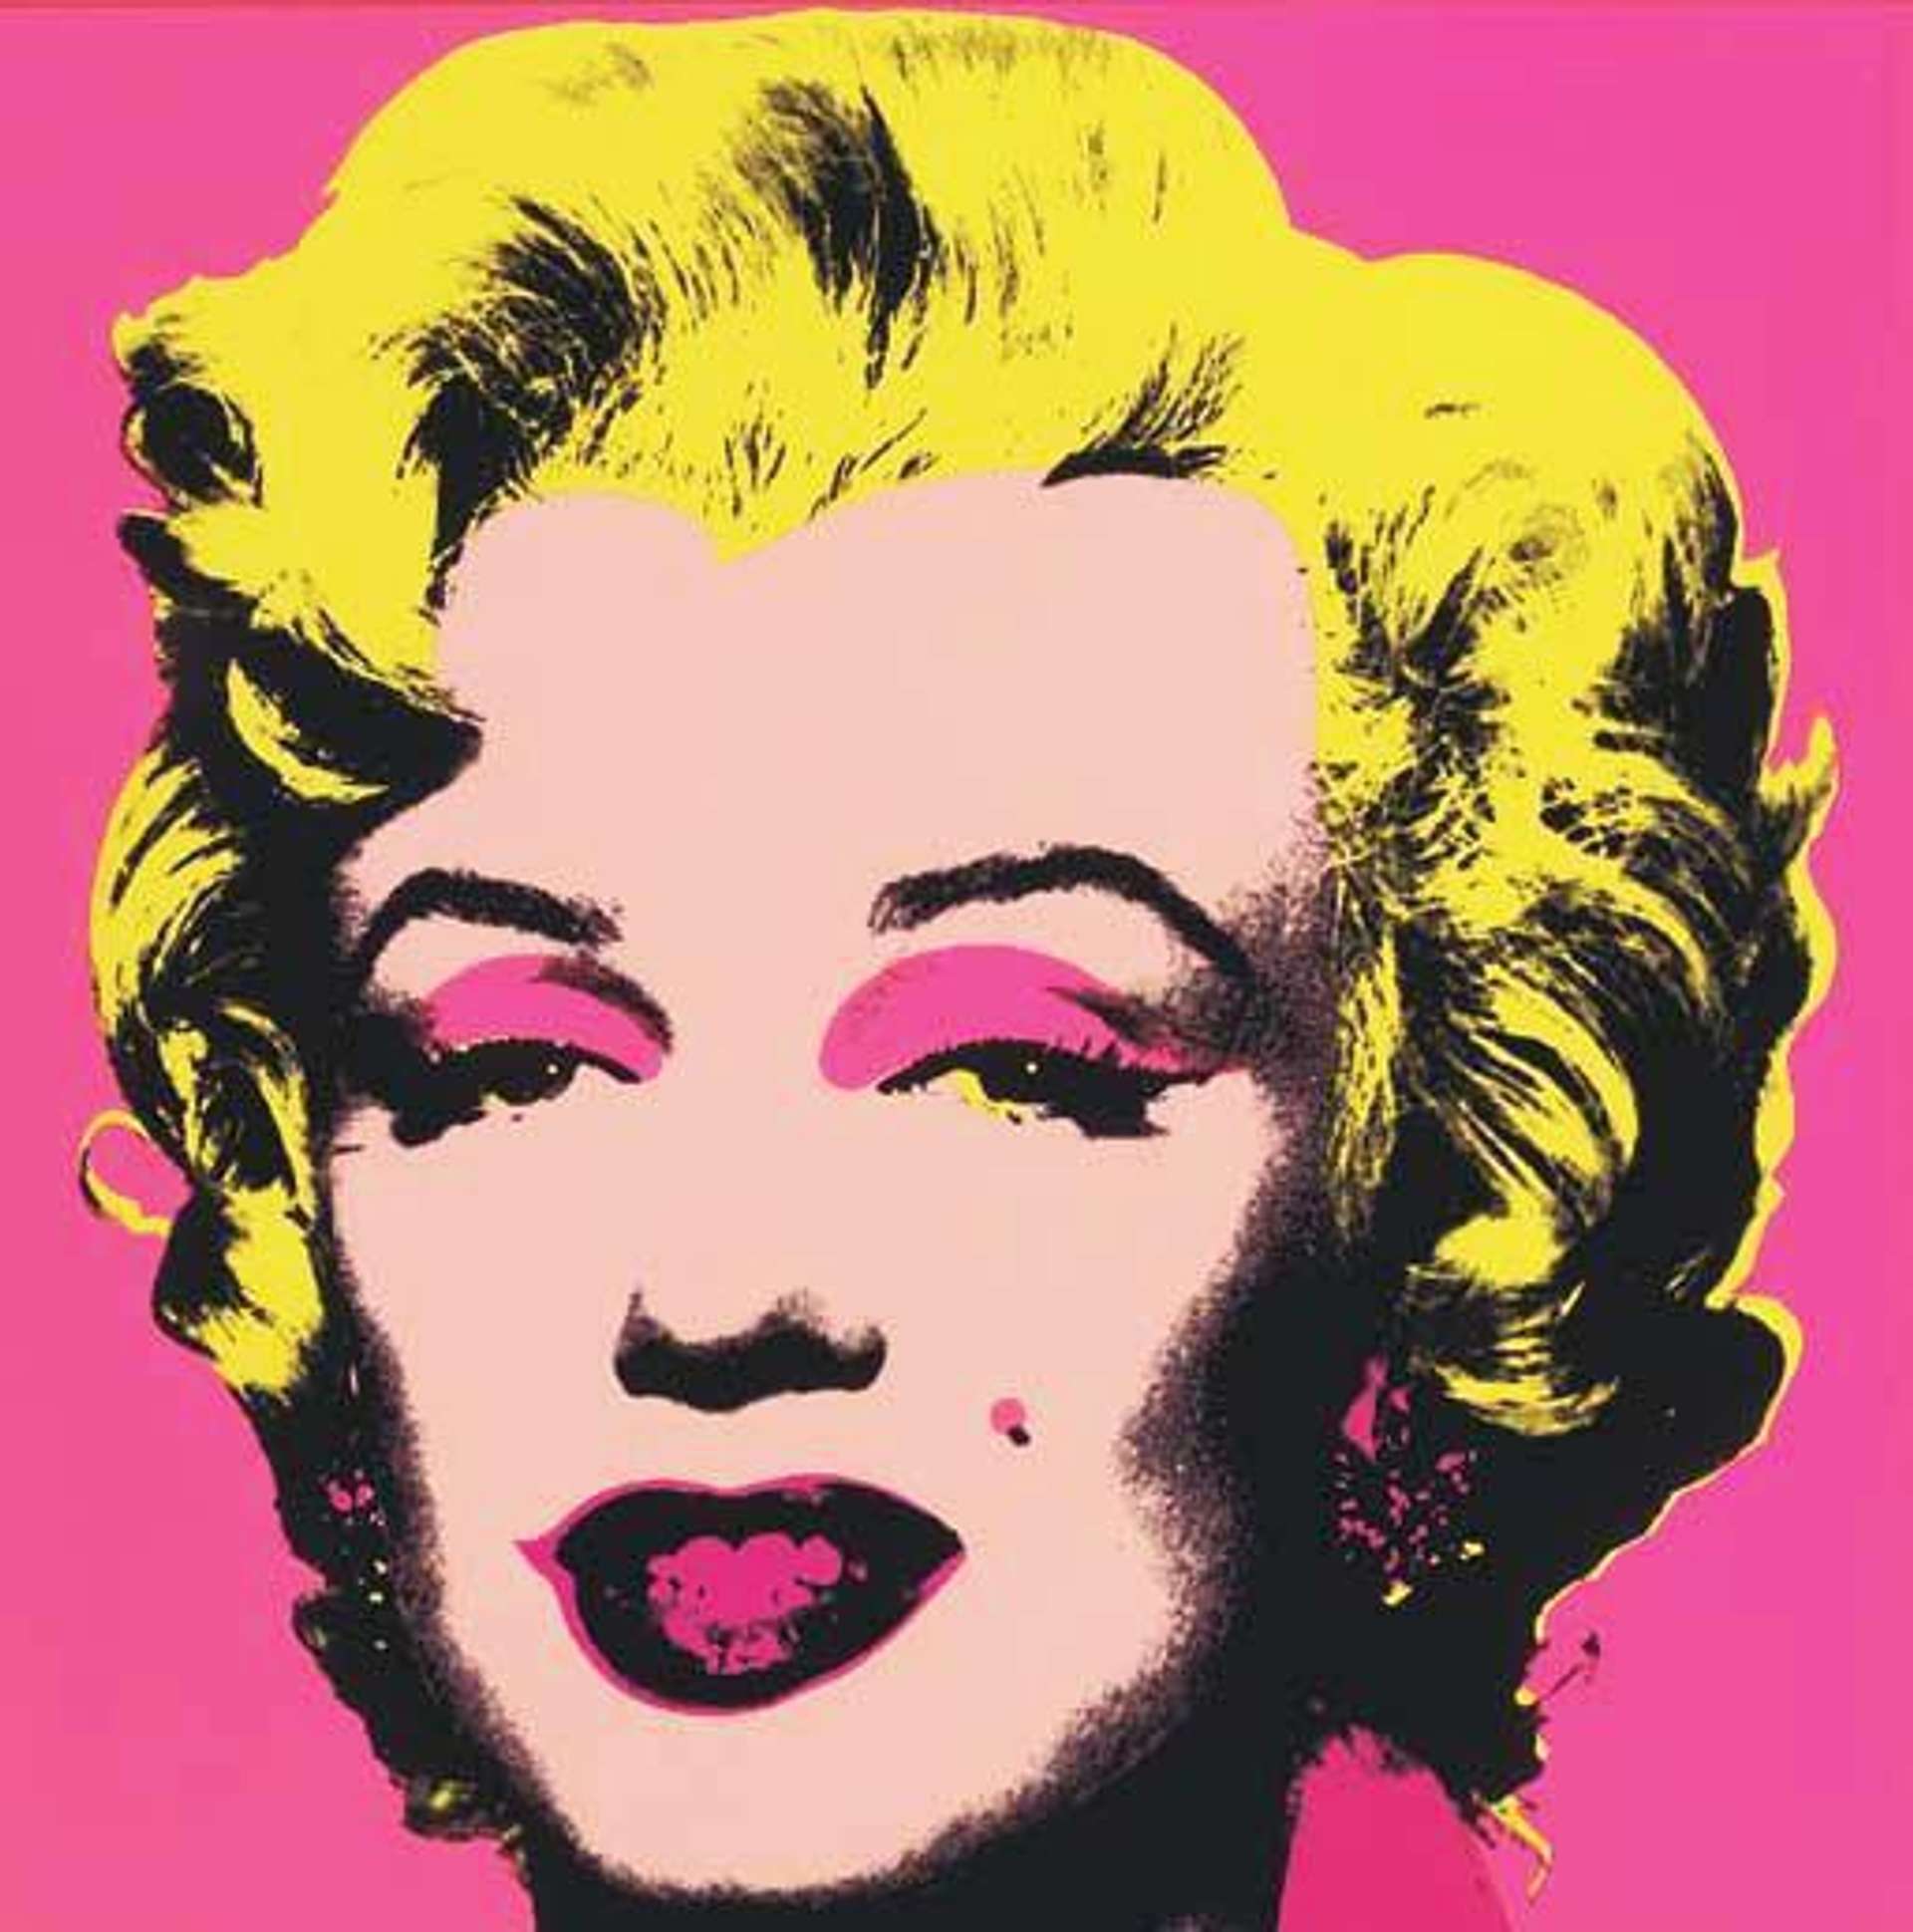 Where To See Andy Warhol’s Most Famous Works